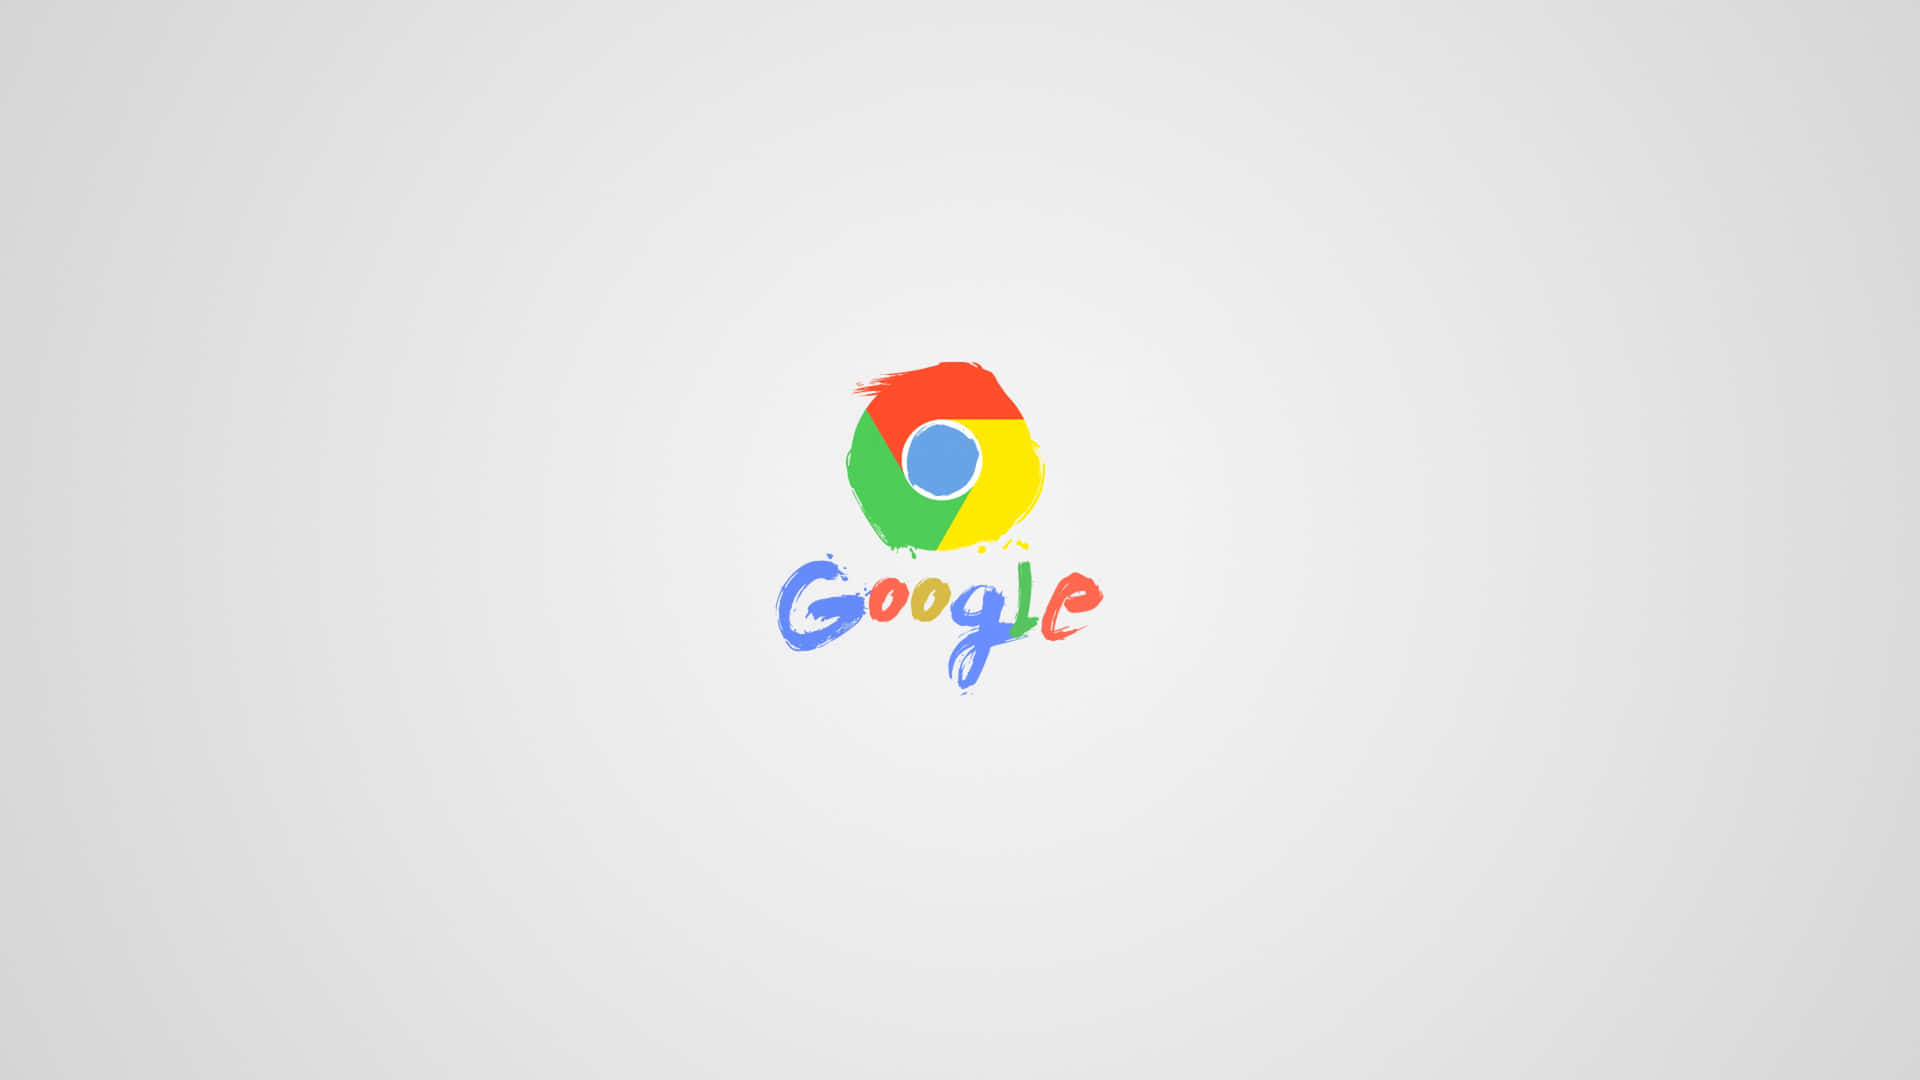 Google Chrome, the world's leading web browser